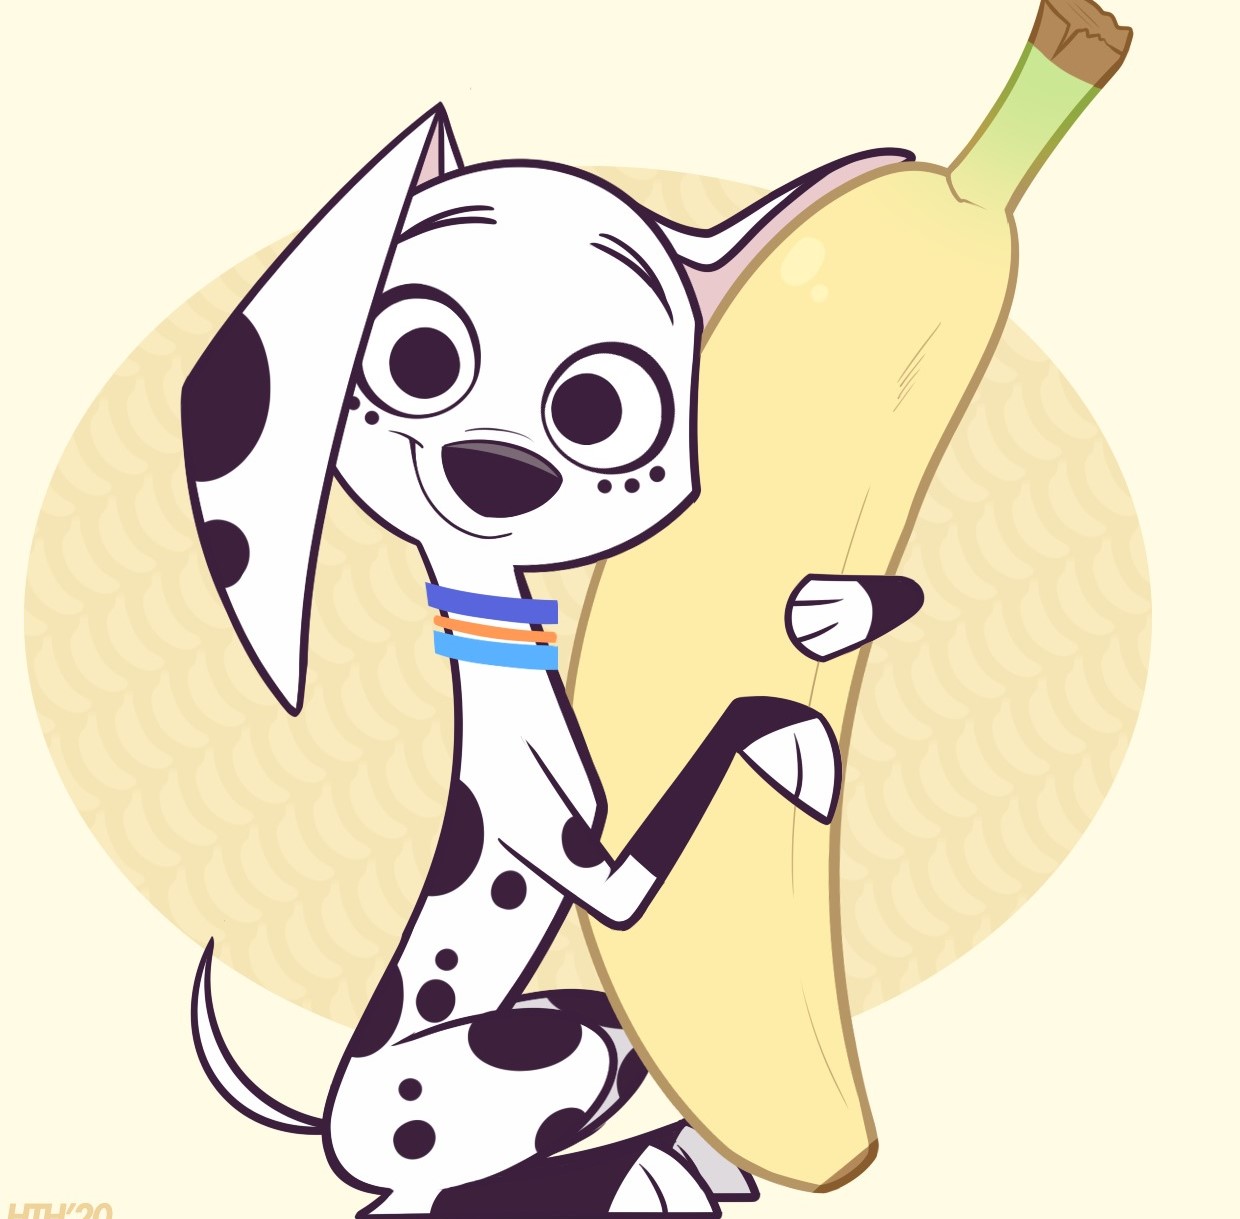 21-facts-about-dolly-101-dalmatian-street